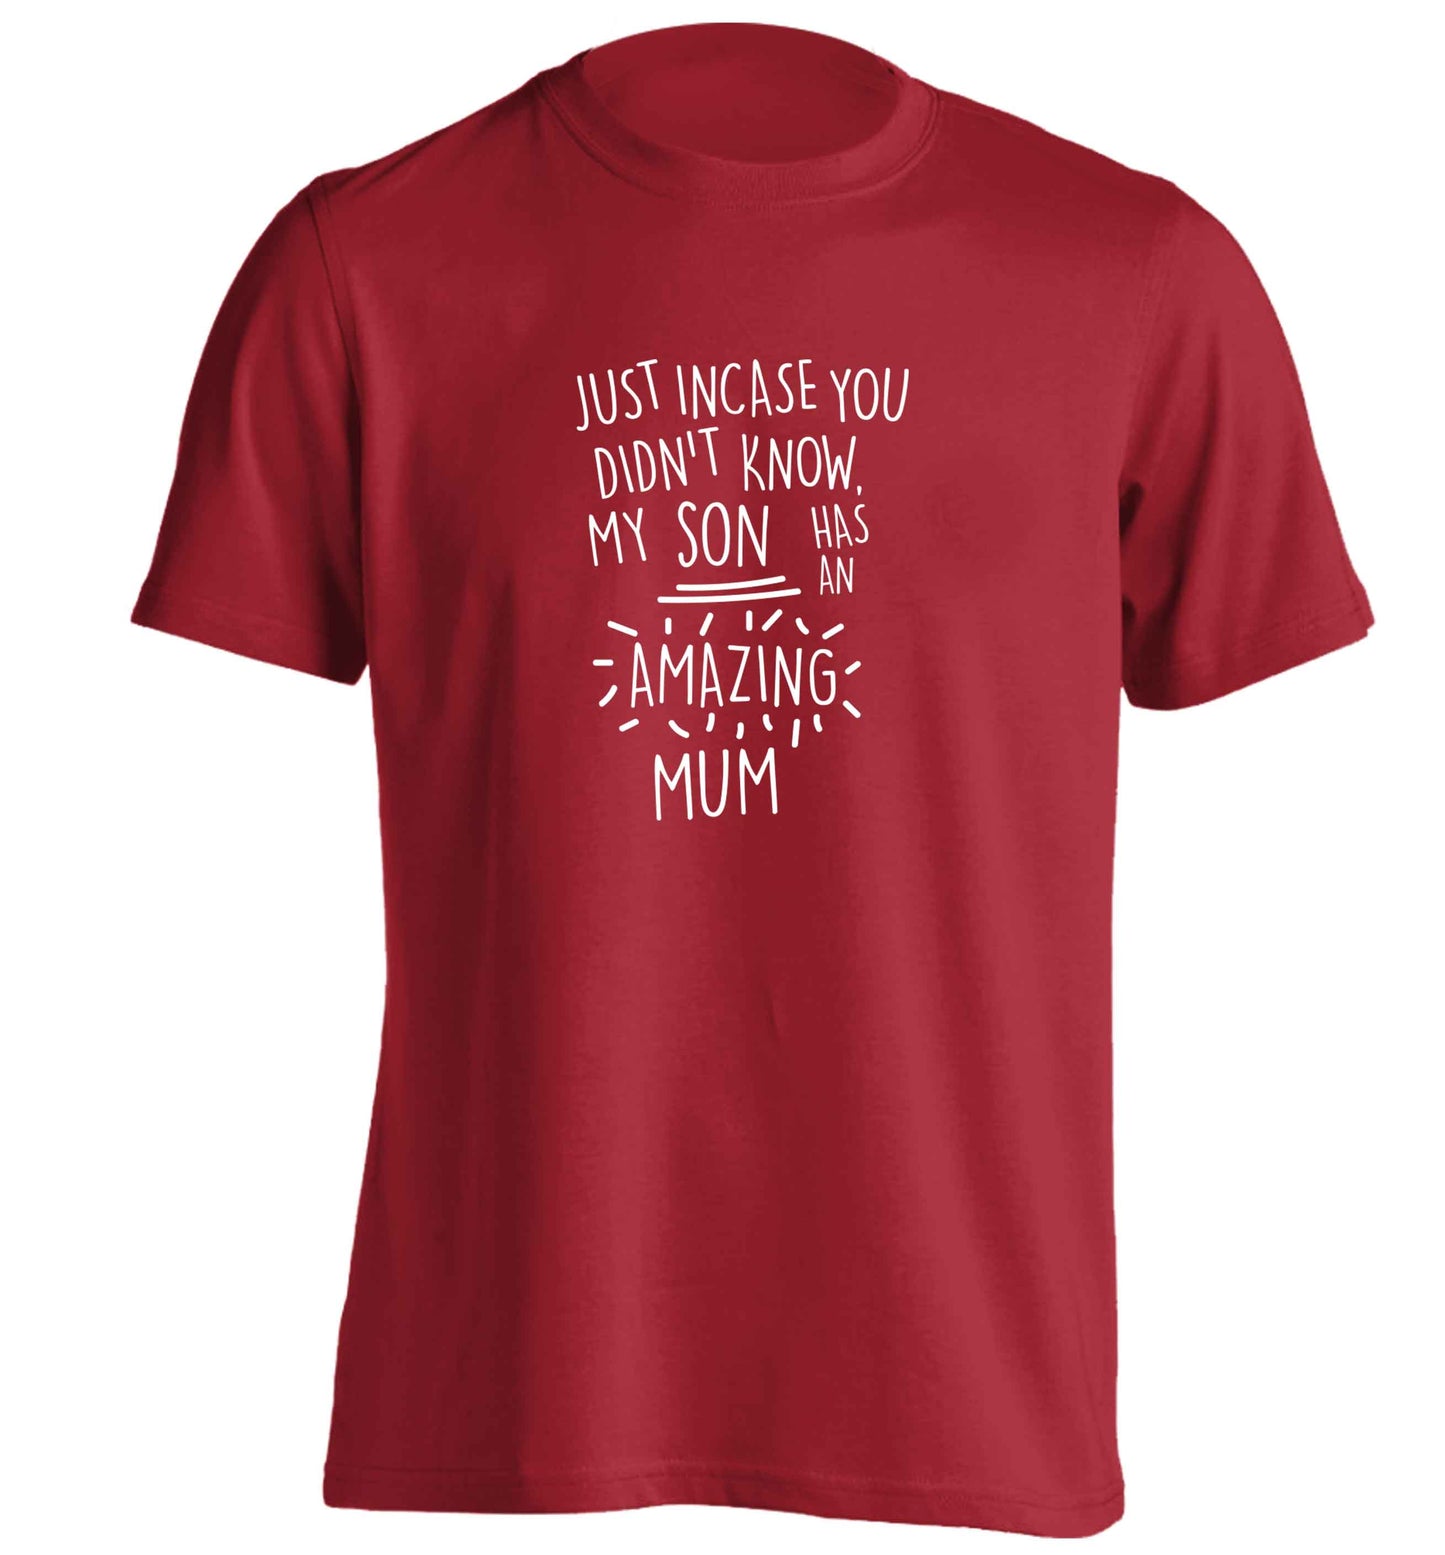 Just incase you didn't know my son has an amazing mum adults unisex red Tshirt 2XL